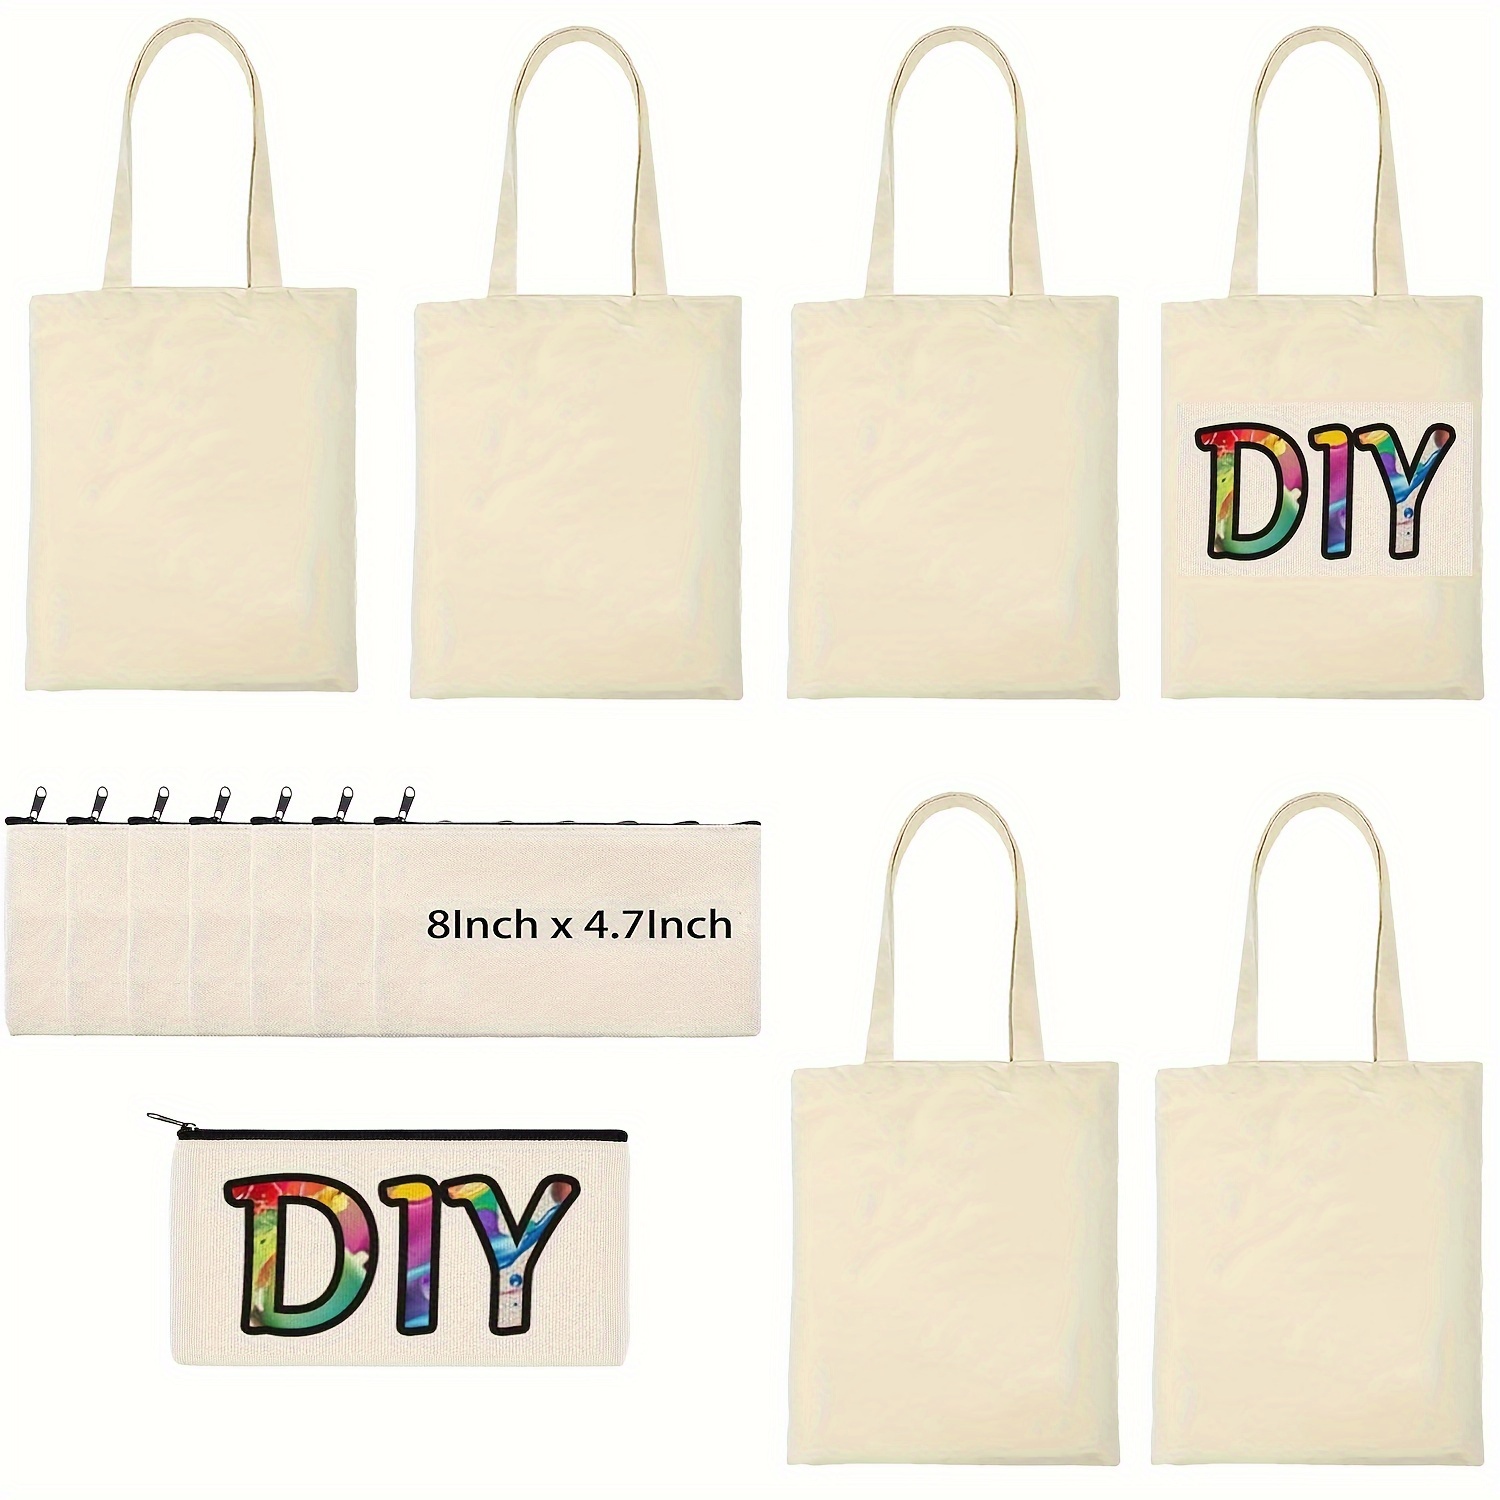 

12pcs Sublimation Blanks Tote Bags, Reusable Grocery Bags Diy Heat Transfer Canvas Tote Bags Cosmetic Makeup Bags Shopping Bags With Customized Color For Diy, Advertising, Christmas Craft Gift